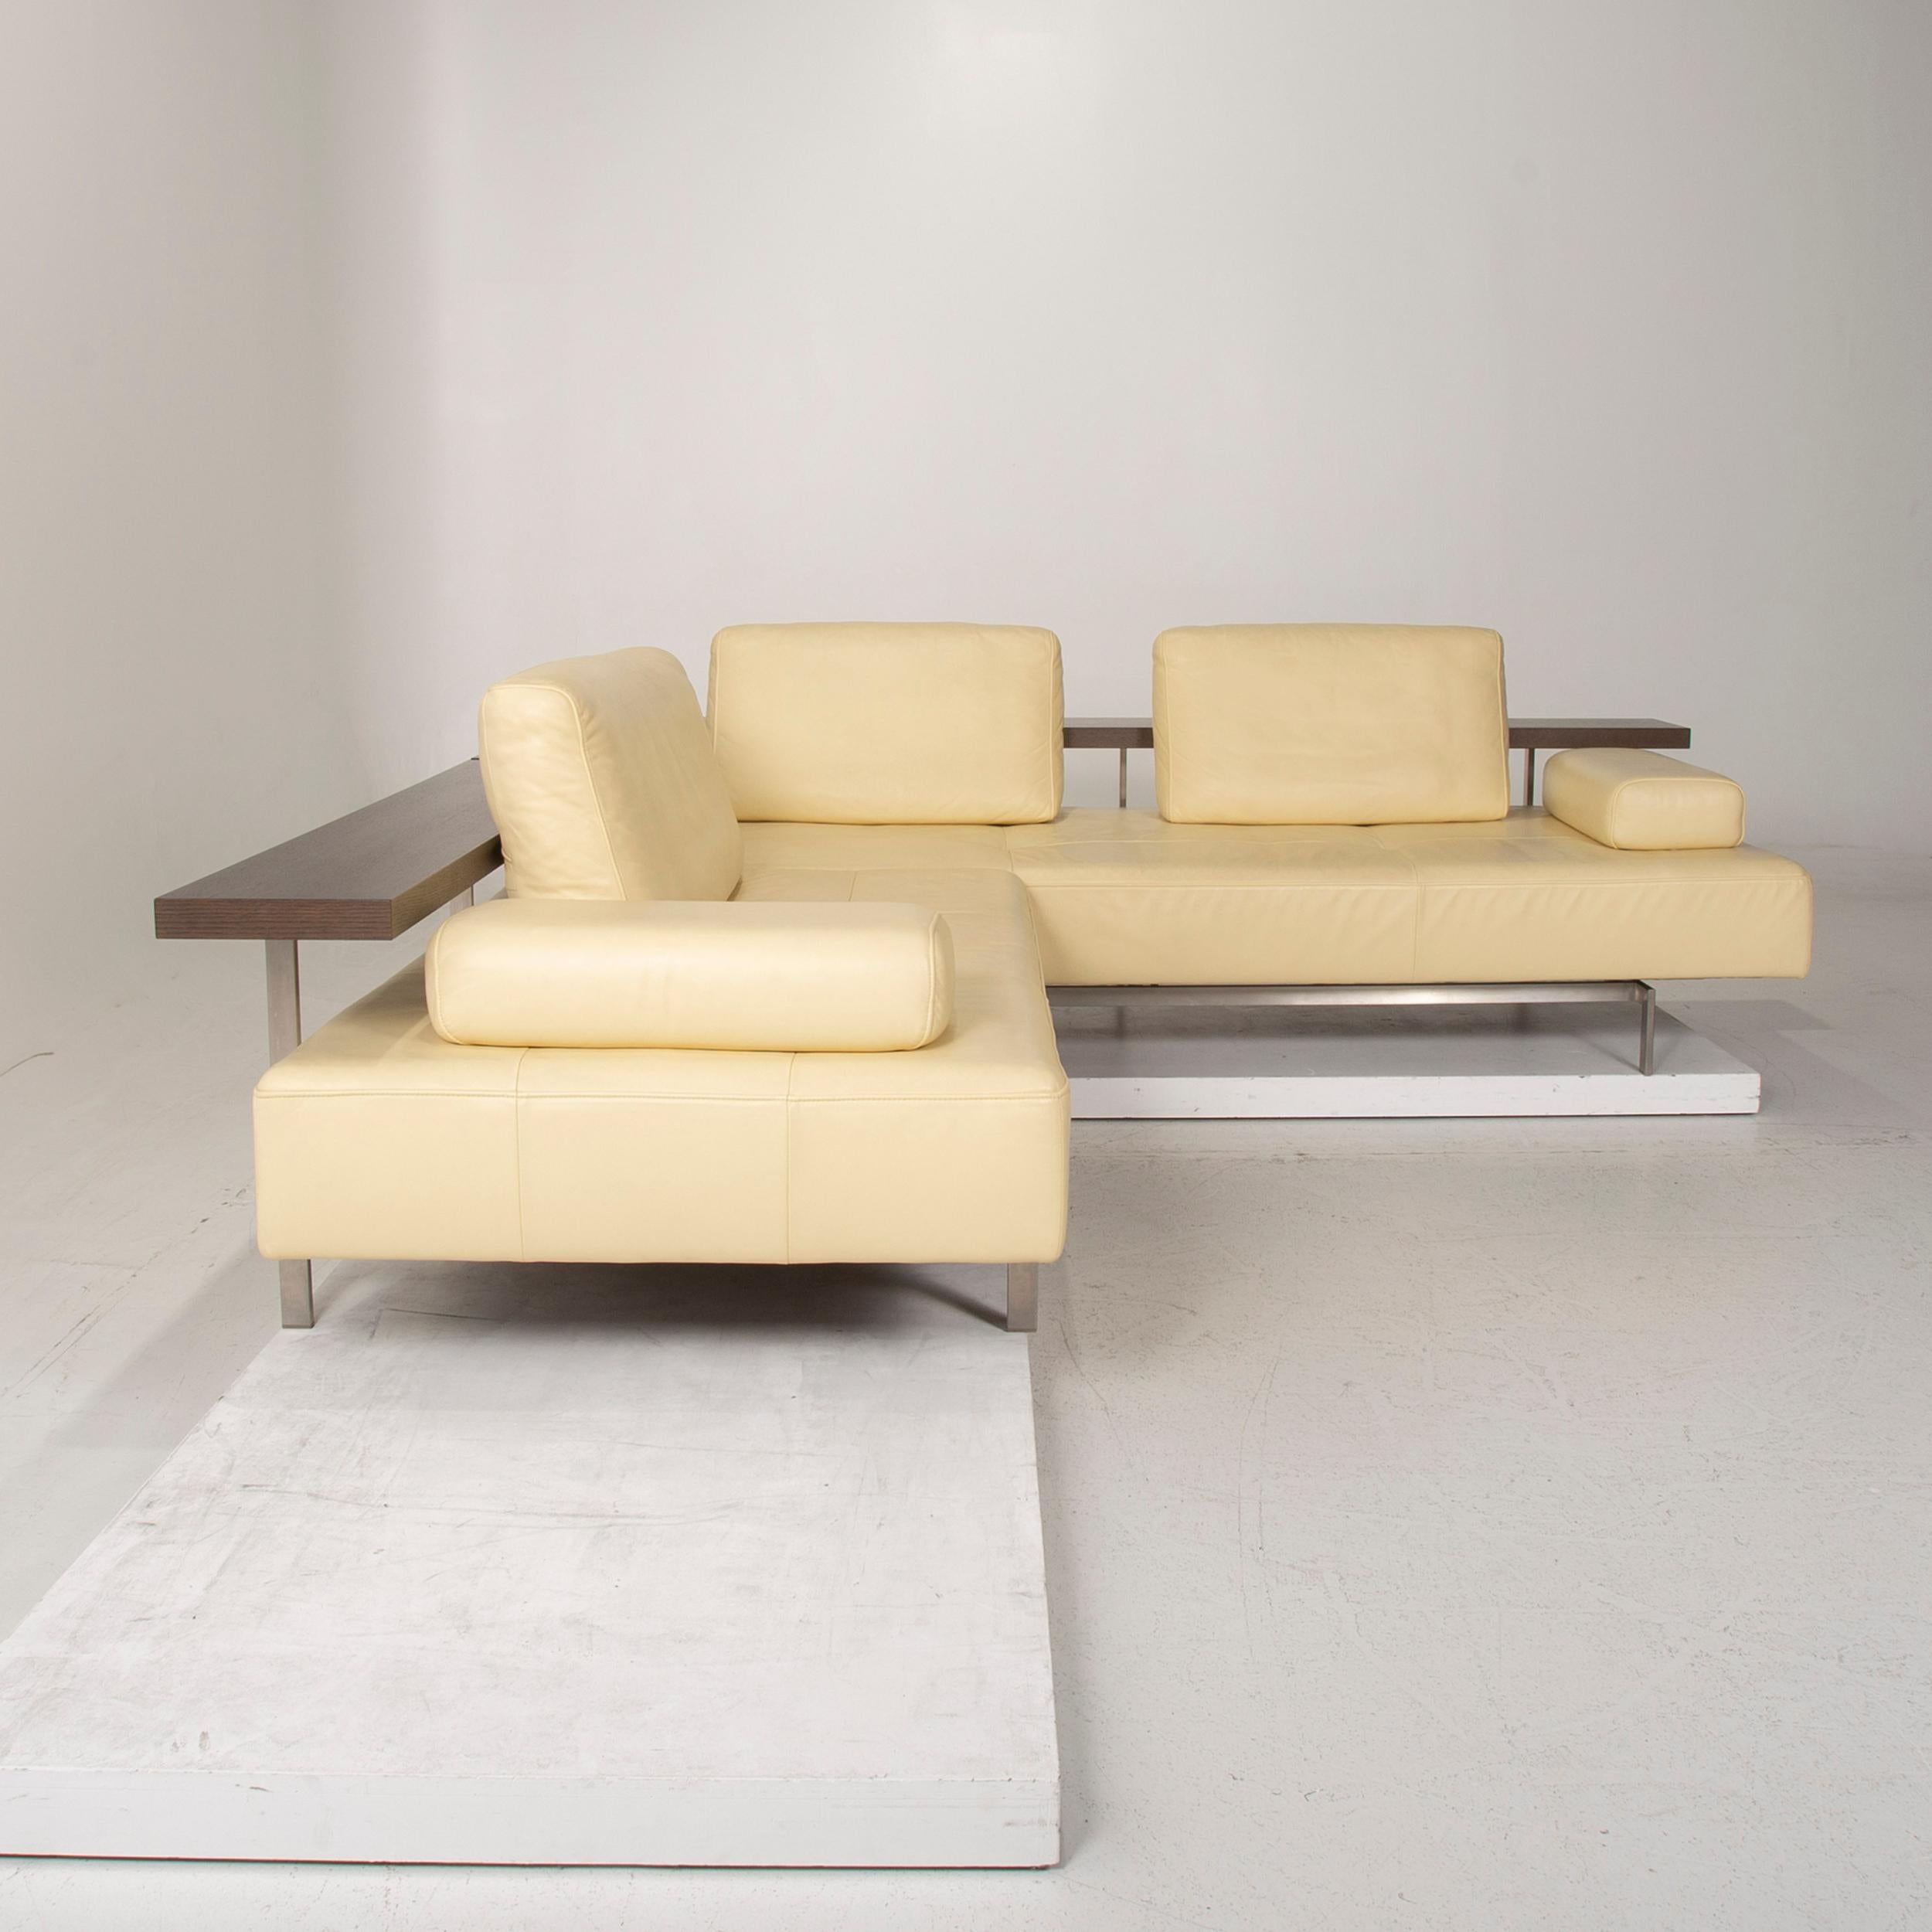 Rolf Benz Dono Leather Sofa, Beige Corner Sofa For Sale at 1stDibs